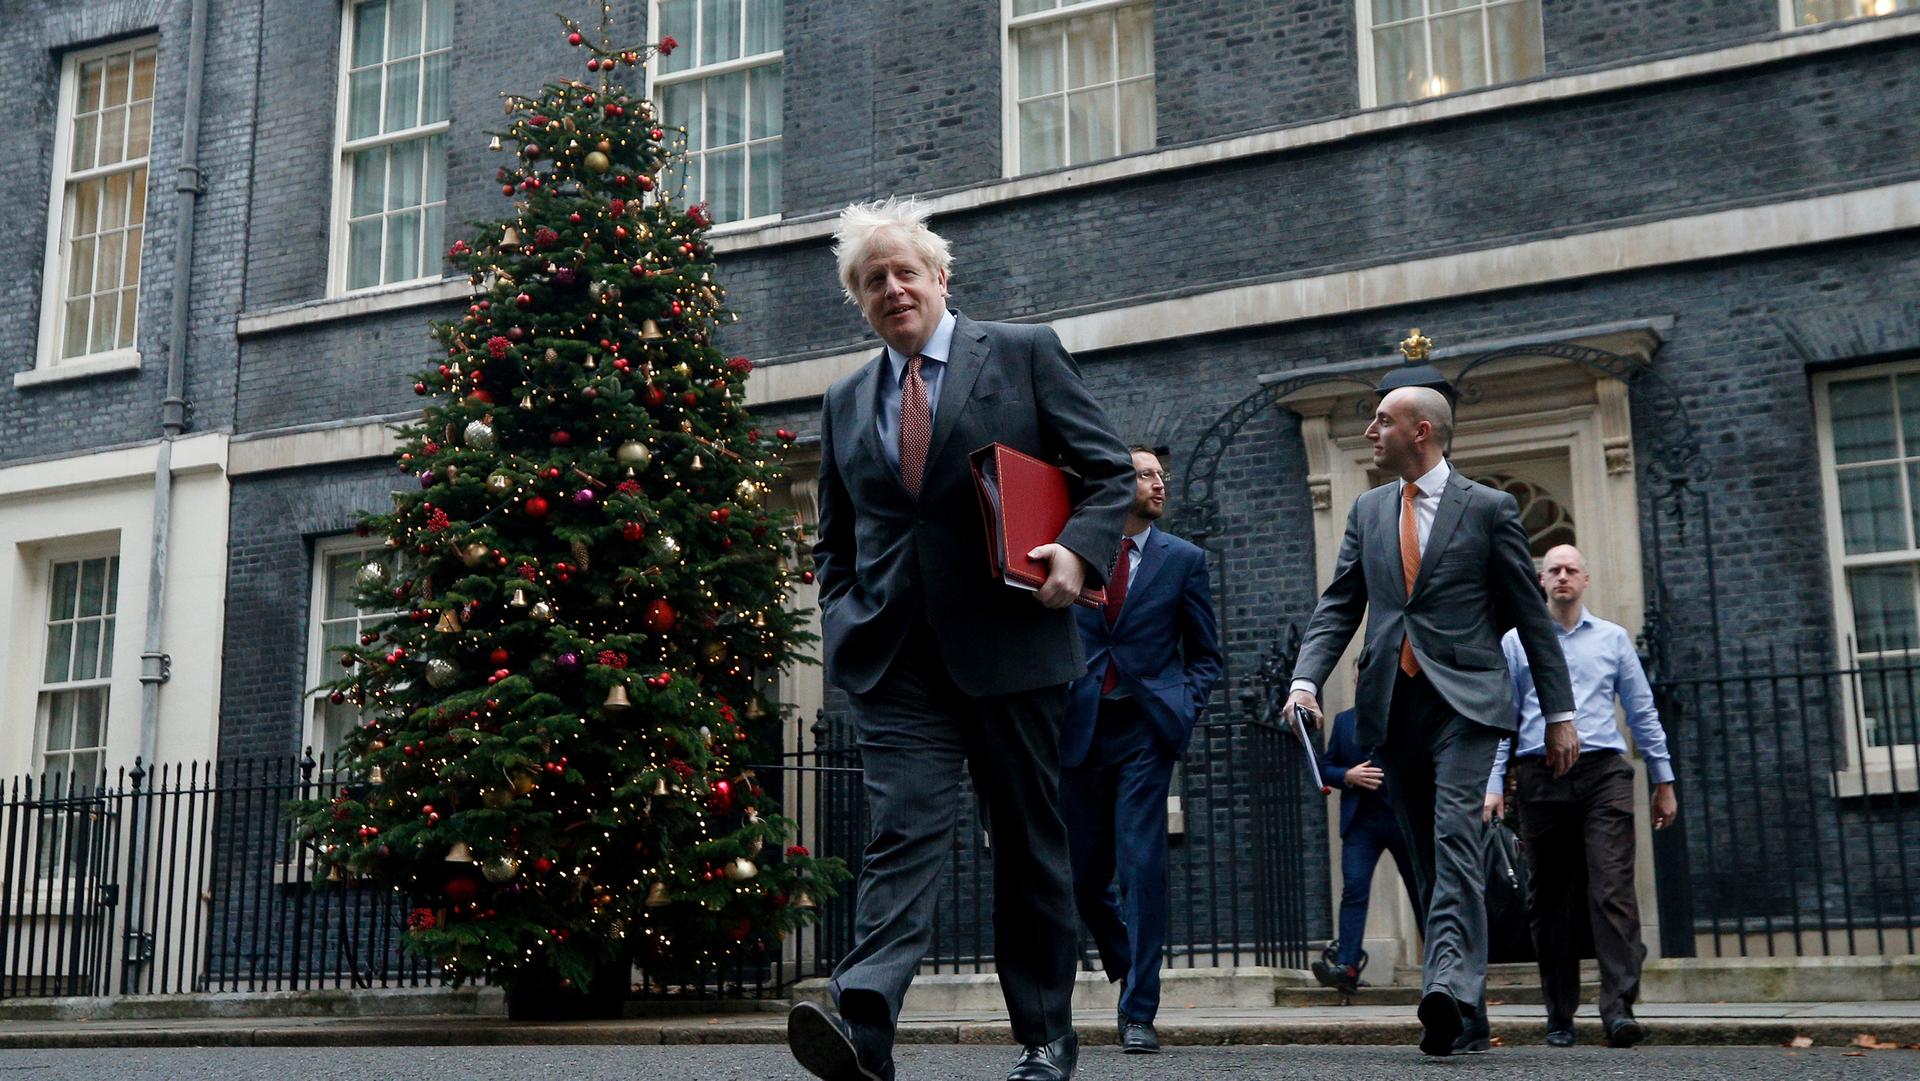 British Prime Minister Boris Johnson is shown wearing a suit and walking with a red folder under his arm and a large Christmas tree in the background.